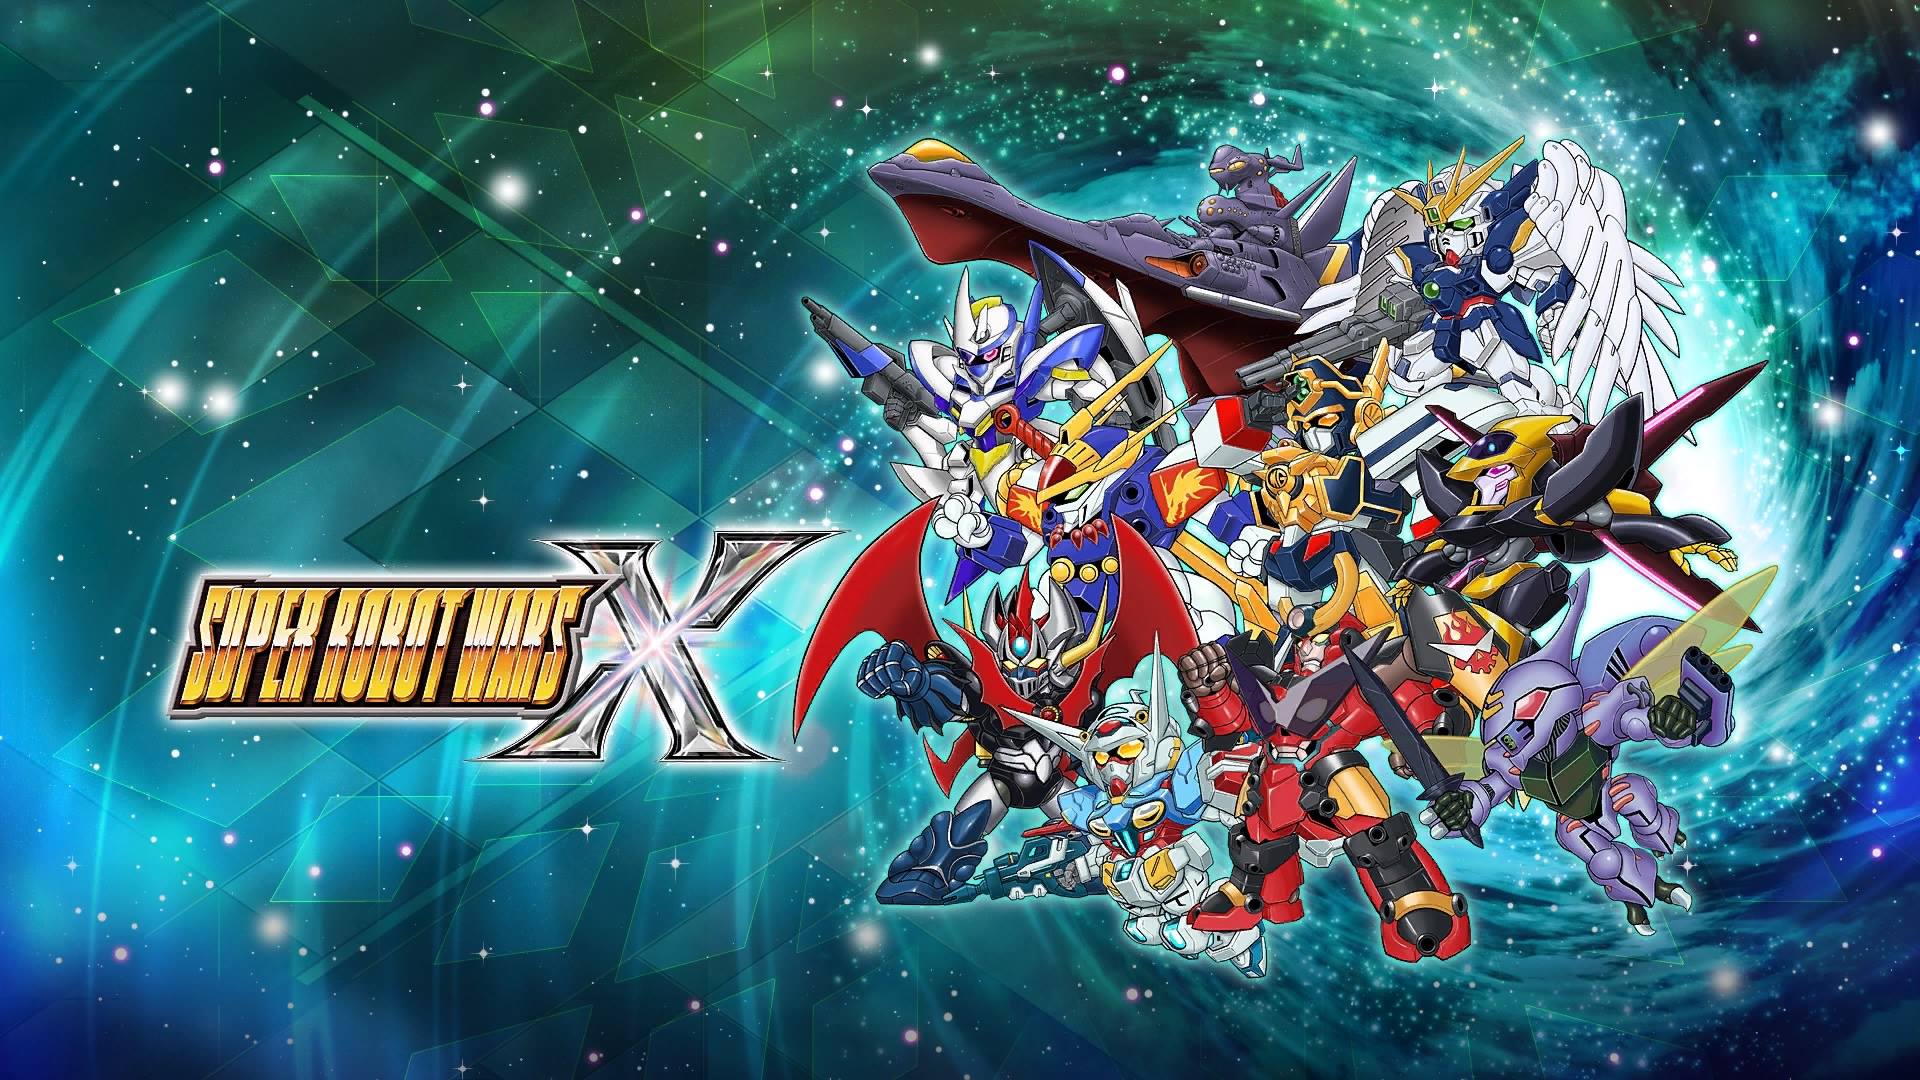 Super Robot Wars X Review. Your favorite super robots are back in action, this time in English